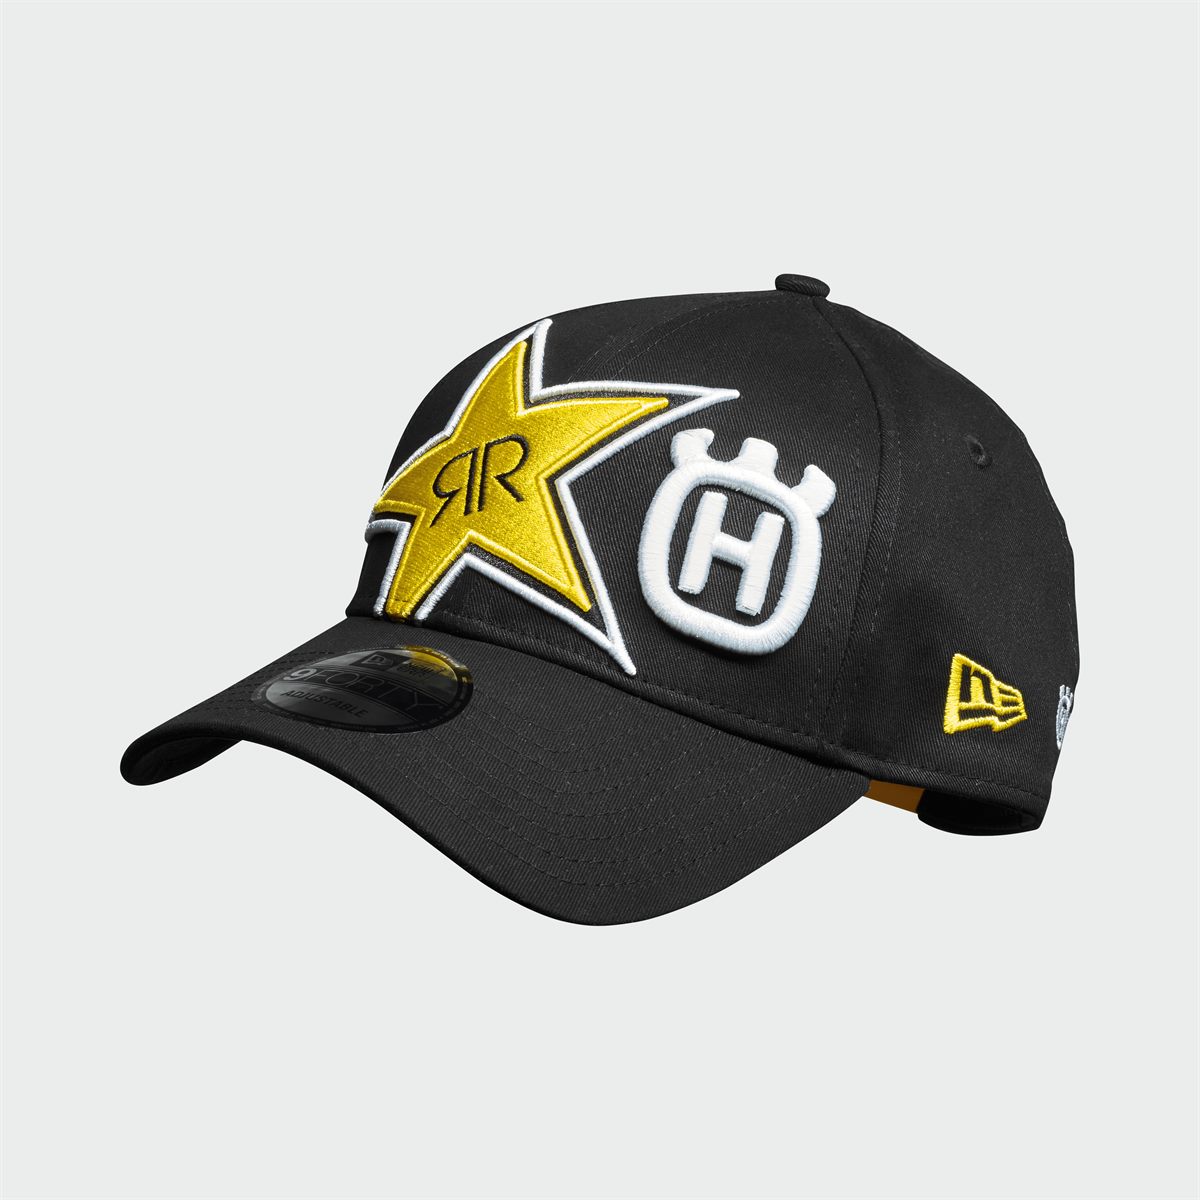 2019 Rockstar Energy Husqvarna Factory Racing Casual Clothing Collection - RS REPLICA TEAM CAPE